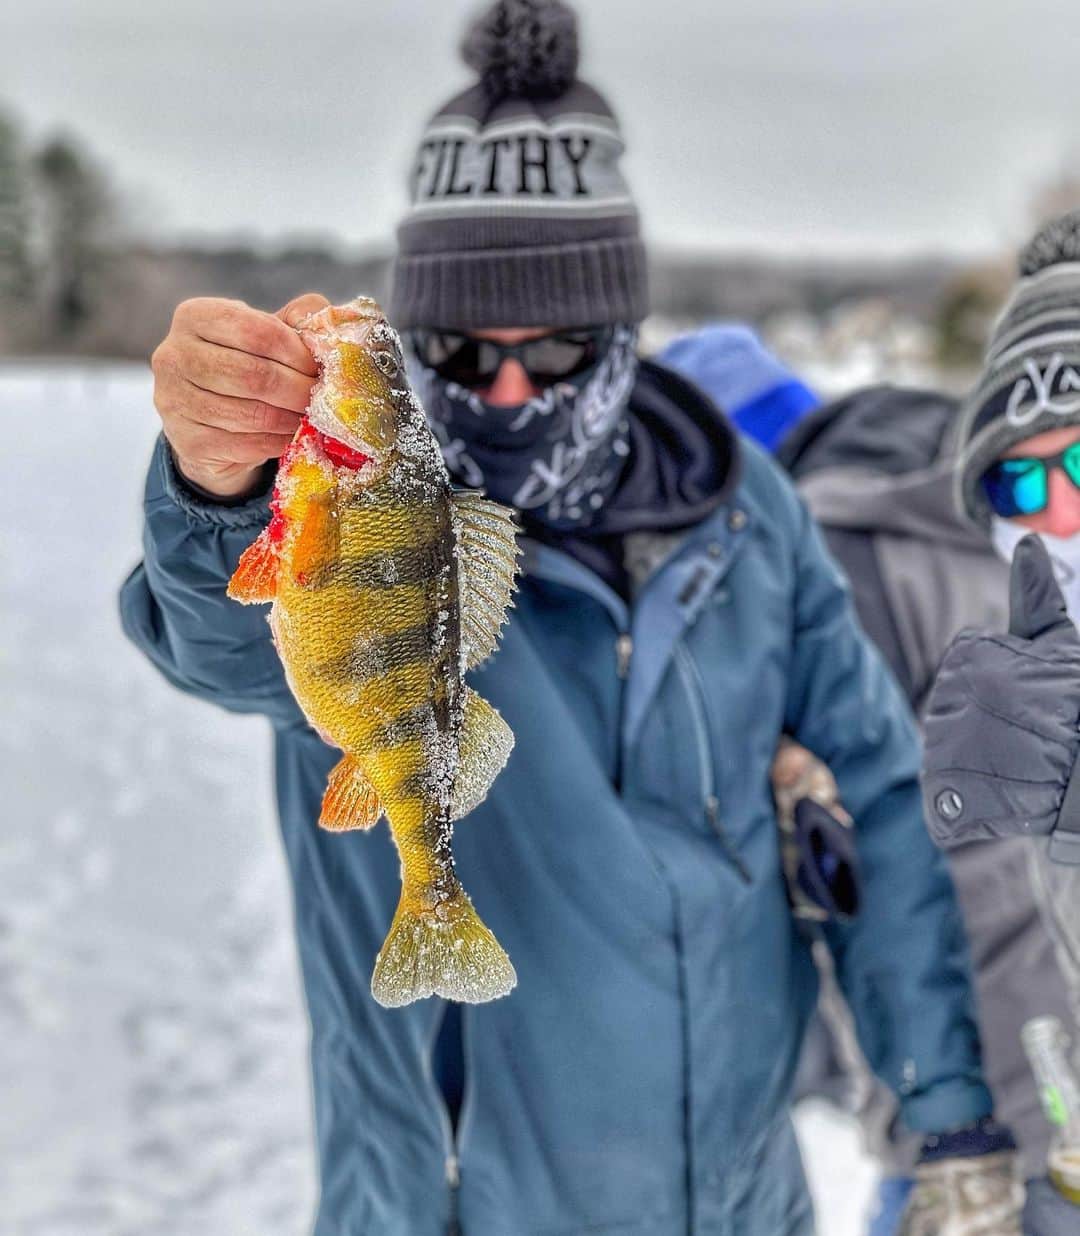 Filthy Anglers™のインスタグラム：「Got a few of the Filthy fellas on the ice for the first time this past Monday.  We hit up a local lake in Massachusetts, drilled some holes, had some beverages, ate some jerky, had a number of laughs and caught some decent perch. I can’t take credit for this perch although I’m holding it, was a team effort with @brentoak25 leading the way wrangling this perch in. It was 1.25lbs, pretty decent right! Ice fishing really isn’t my thing to be honest, but hanging out with a group of good friends on the ice, sign me up! Thanks to everyone who joined, looking forward to the next one! Photo credit @mrskillz978 www.filthyanglers.com #fishing #bassfishing #icefishing #ice #massachusetts #bass #perch #angler #snow #winter #filthyanglers」